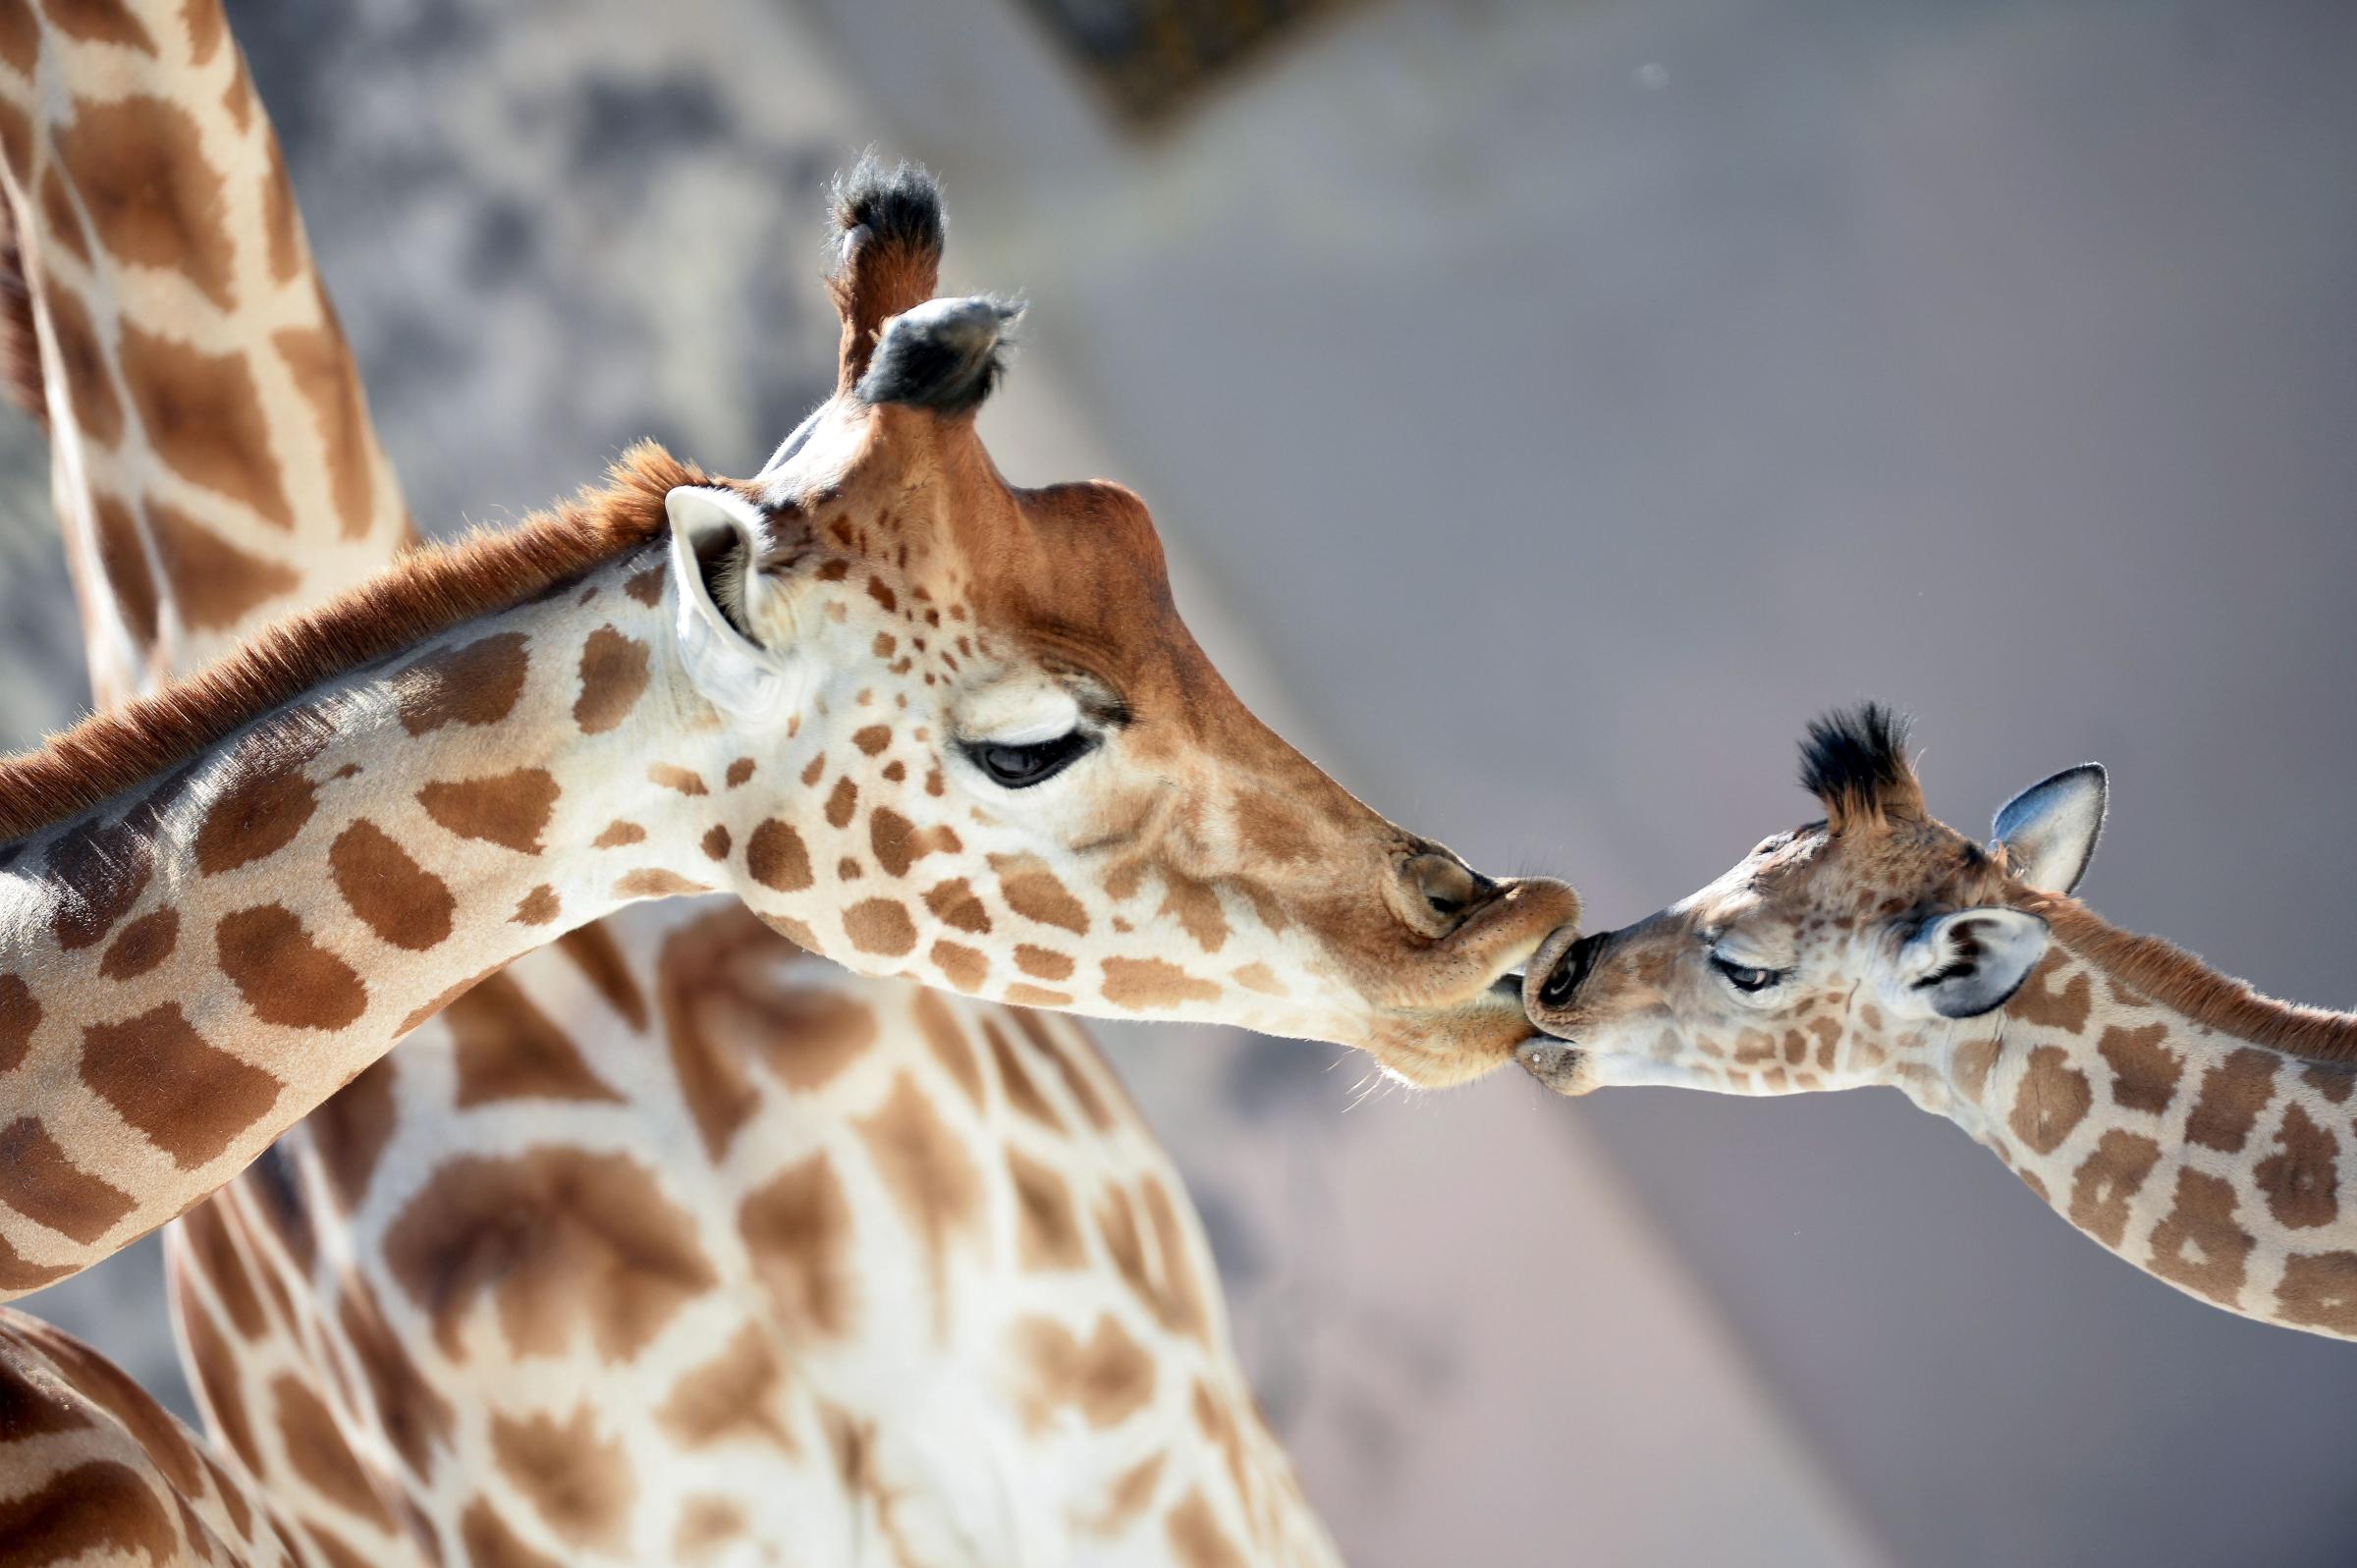 A baby giraffe of Niger named Kenai, right, born on Aug. 25, 2016, kisses his mother Dioni at the zoo of La Fleche, northwestern France, on on Aug. 31, 2016.